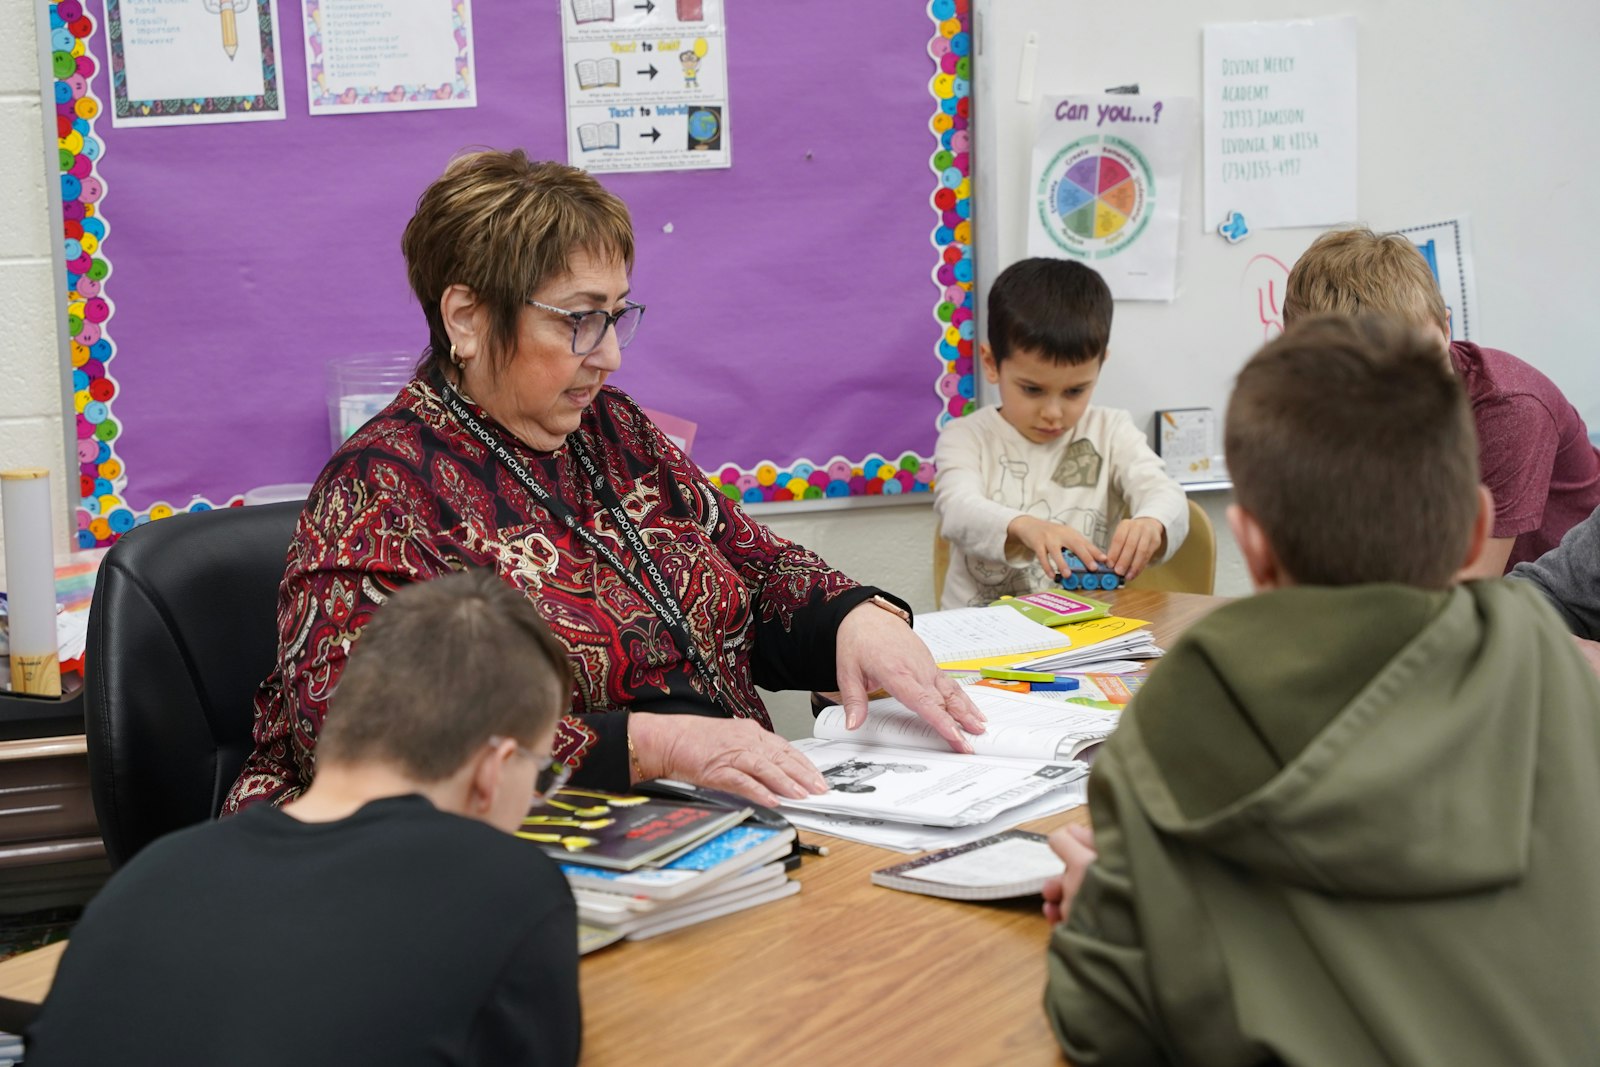 Louise Zilka is the reading and language arts teacher at Divine Mercy Academy after teaching nine years at Most Holy Trinity in Detroit and 30 years at Lincoln Park Public Schools, primarily working with children with special needs.